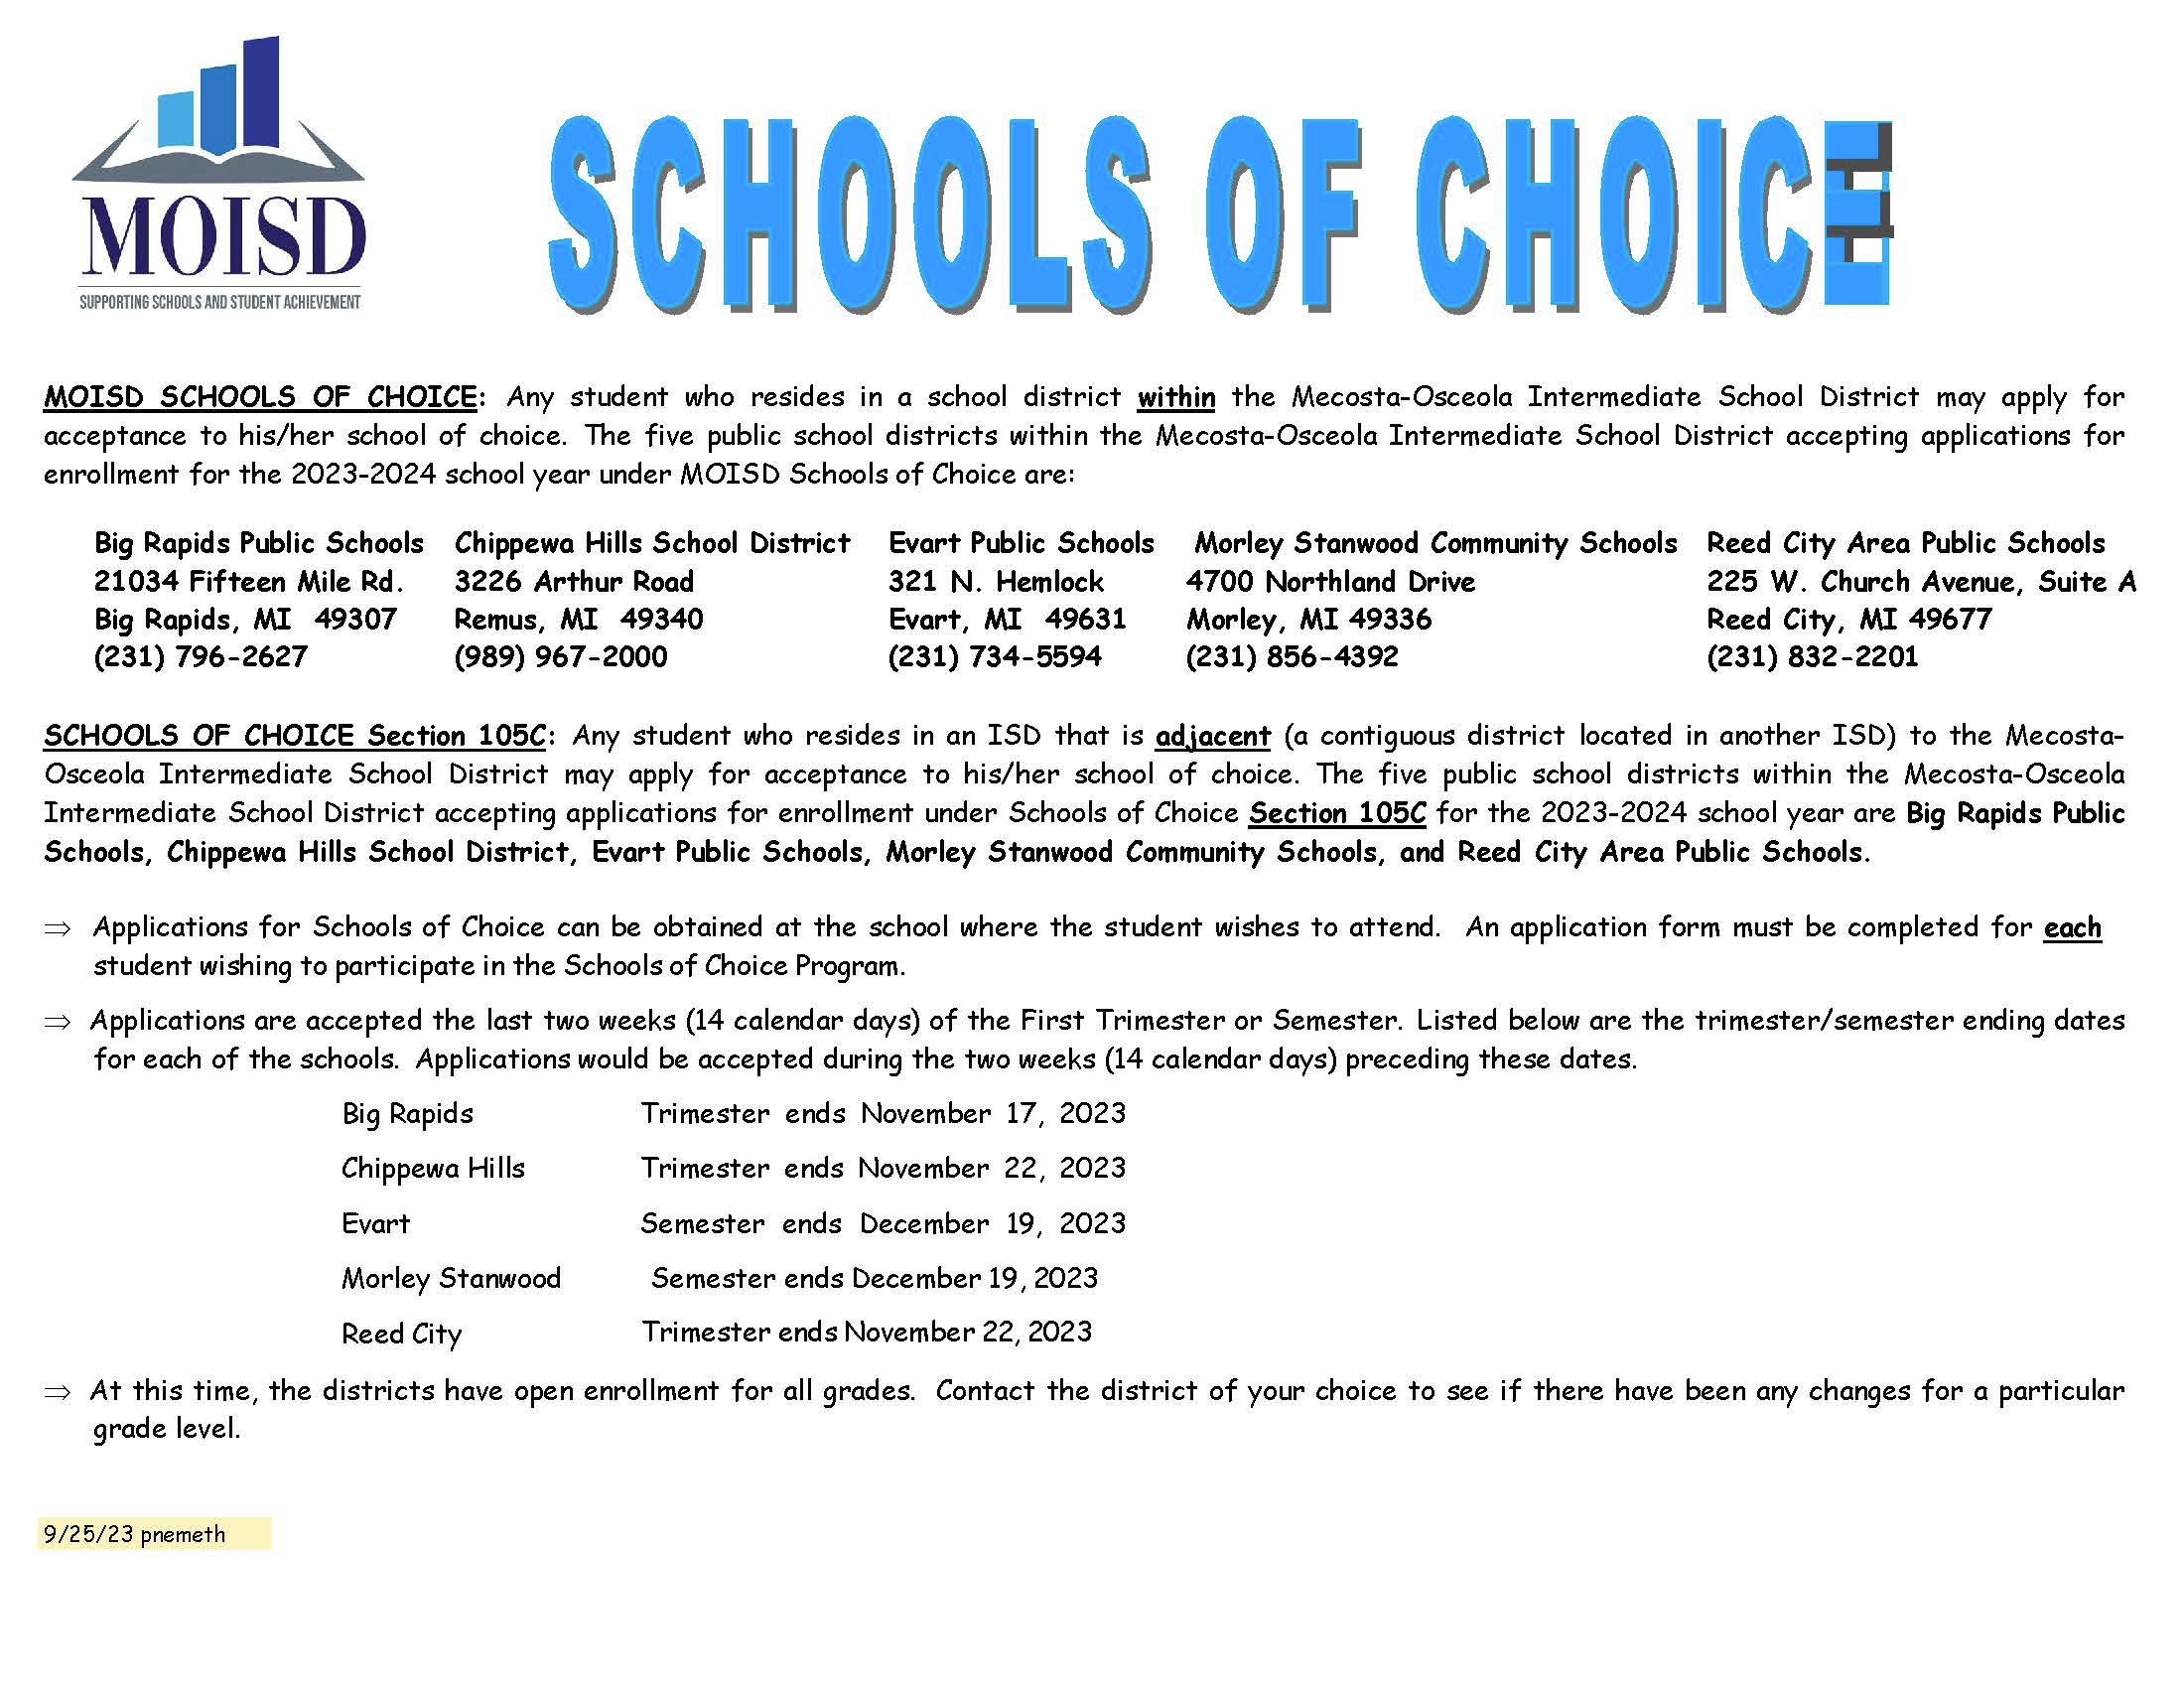 Any student who resides in a school district within the Mecosta-Osceola Intermediate School District may apply for acceptance to his/her school of choice. 